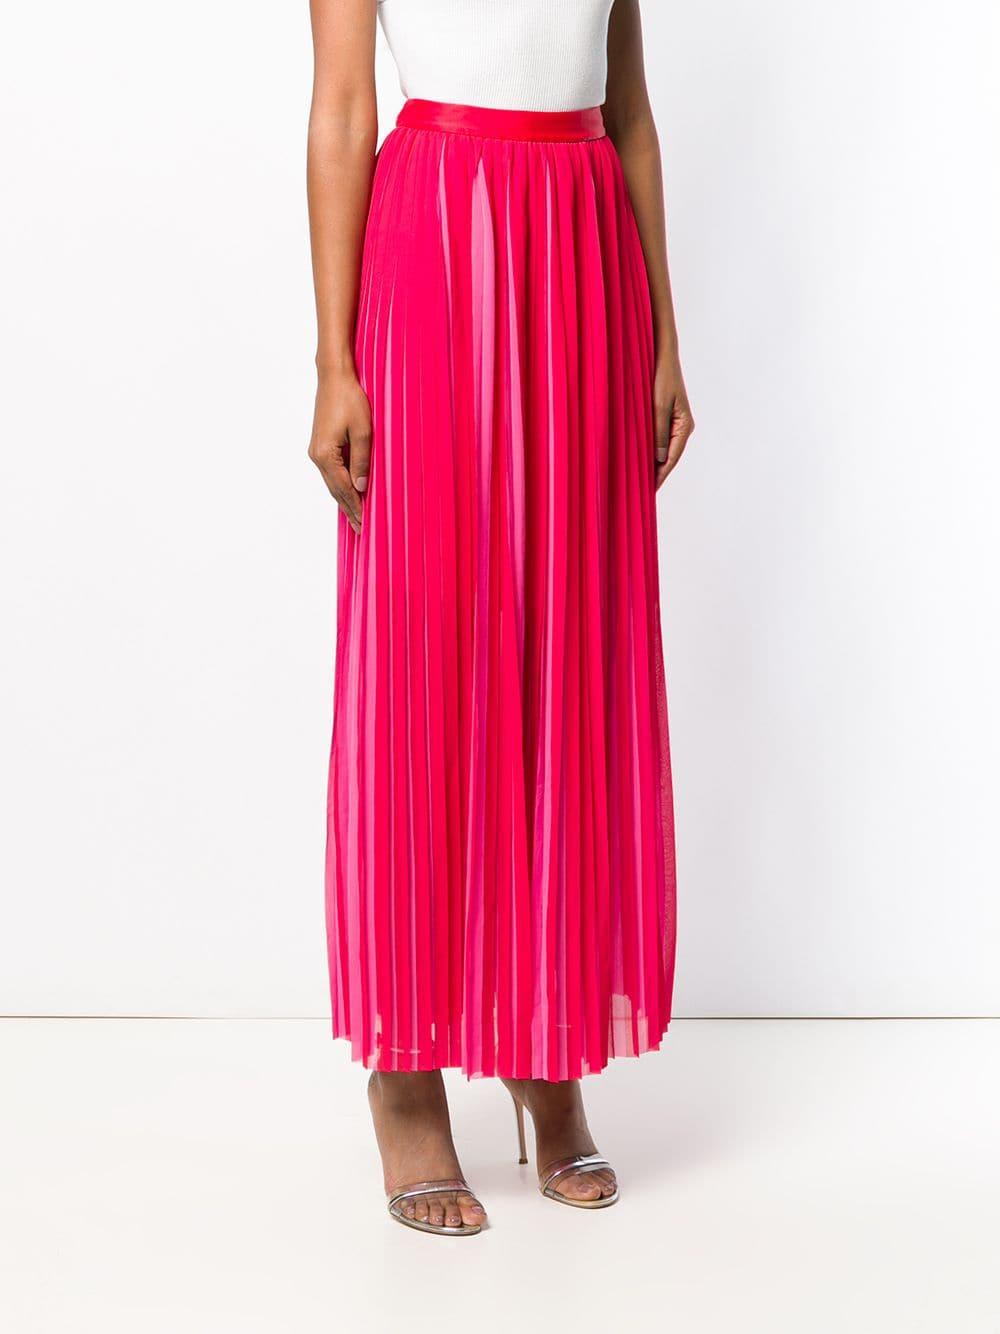 Karl Lagerfeld Pleated Maxi Skirt in Pink | Lyst